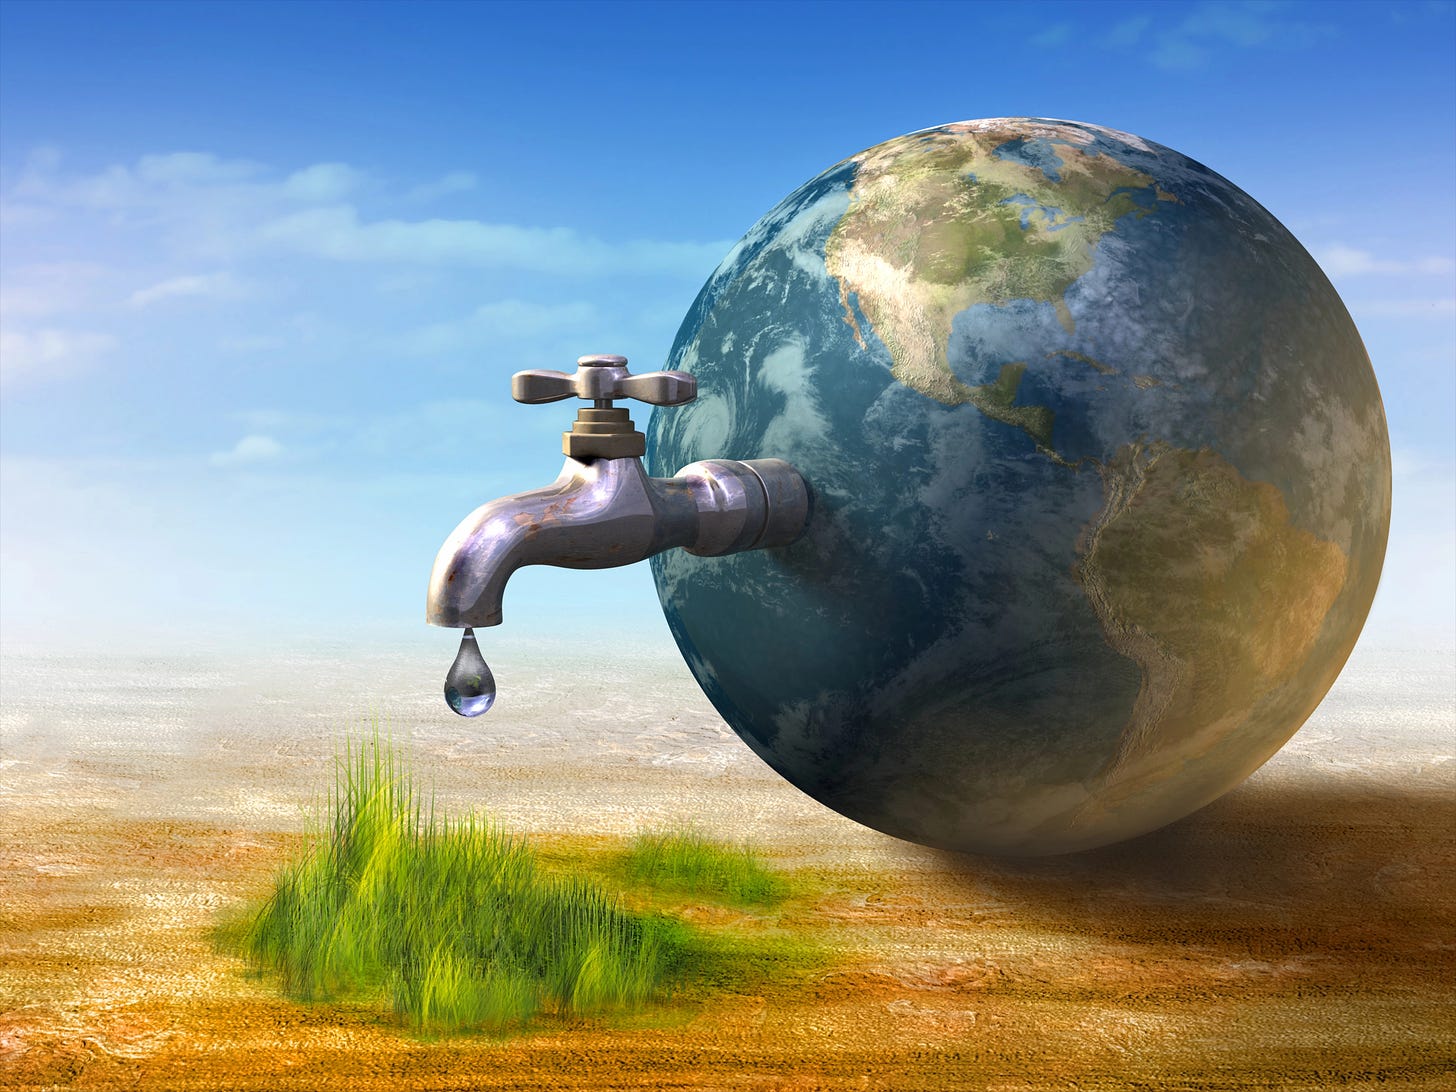 As water scarcity intensifies due to climate change, population growth, and over-extraction, its essential nature for life and industry may elevate its value above petroleum. Geopolitical tensions and economic impacts further underscore the potential shift in value towards water as a critical resource.